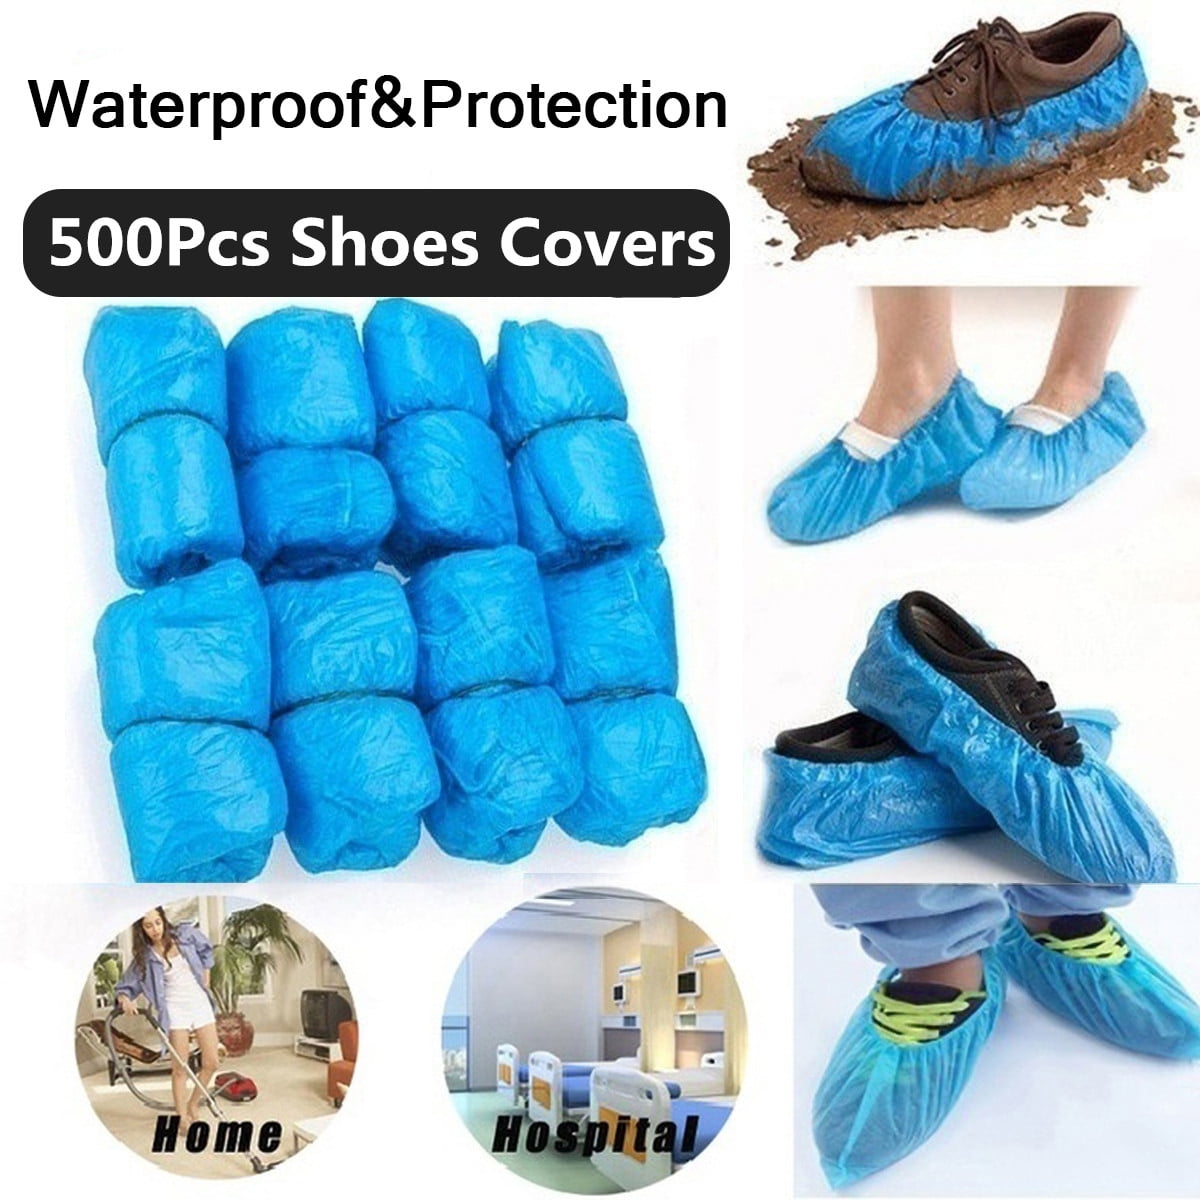 F-blue Non-Slip Durable Disposable Boot Shoes Covers for Indoor Protect Home Floors Outdoors 100pcs 